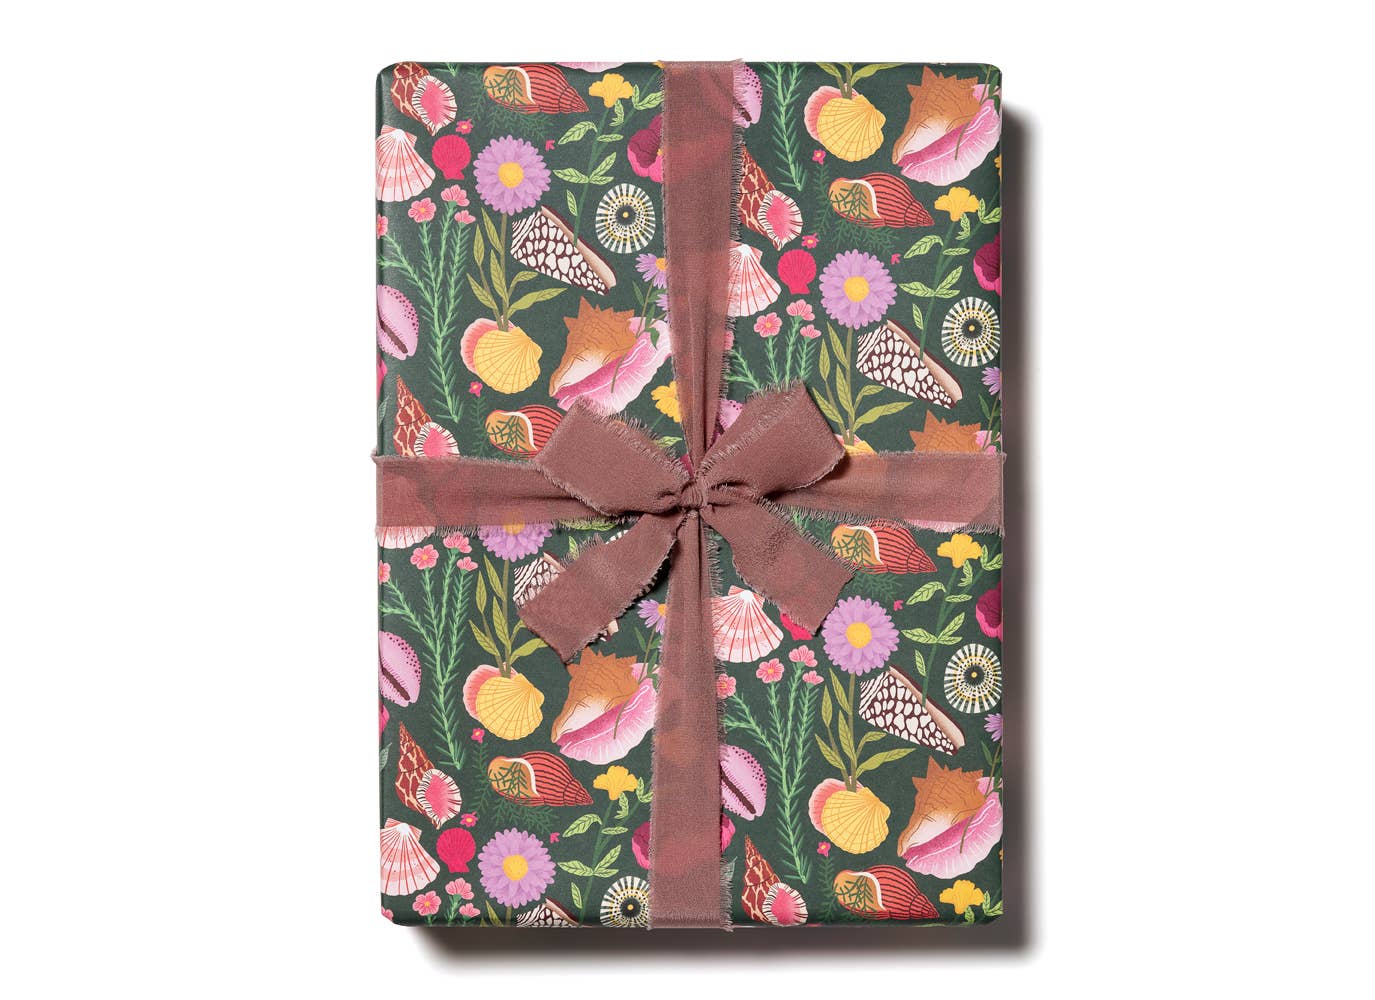 Red Cap Cards - Shells and Flowers wrapping paper rolls – The Cove by Dune